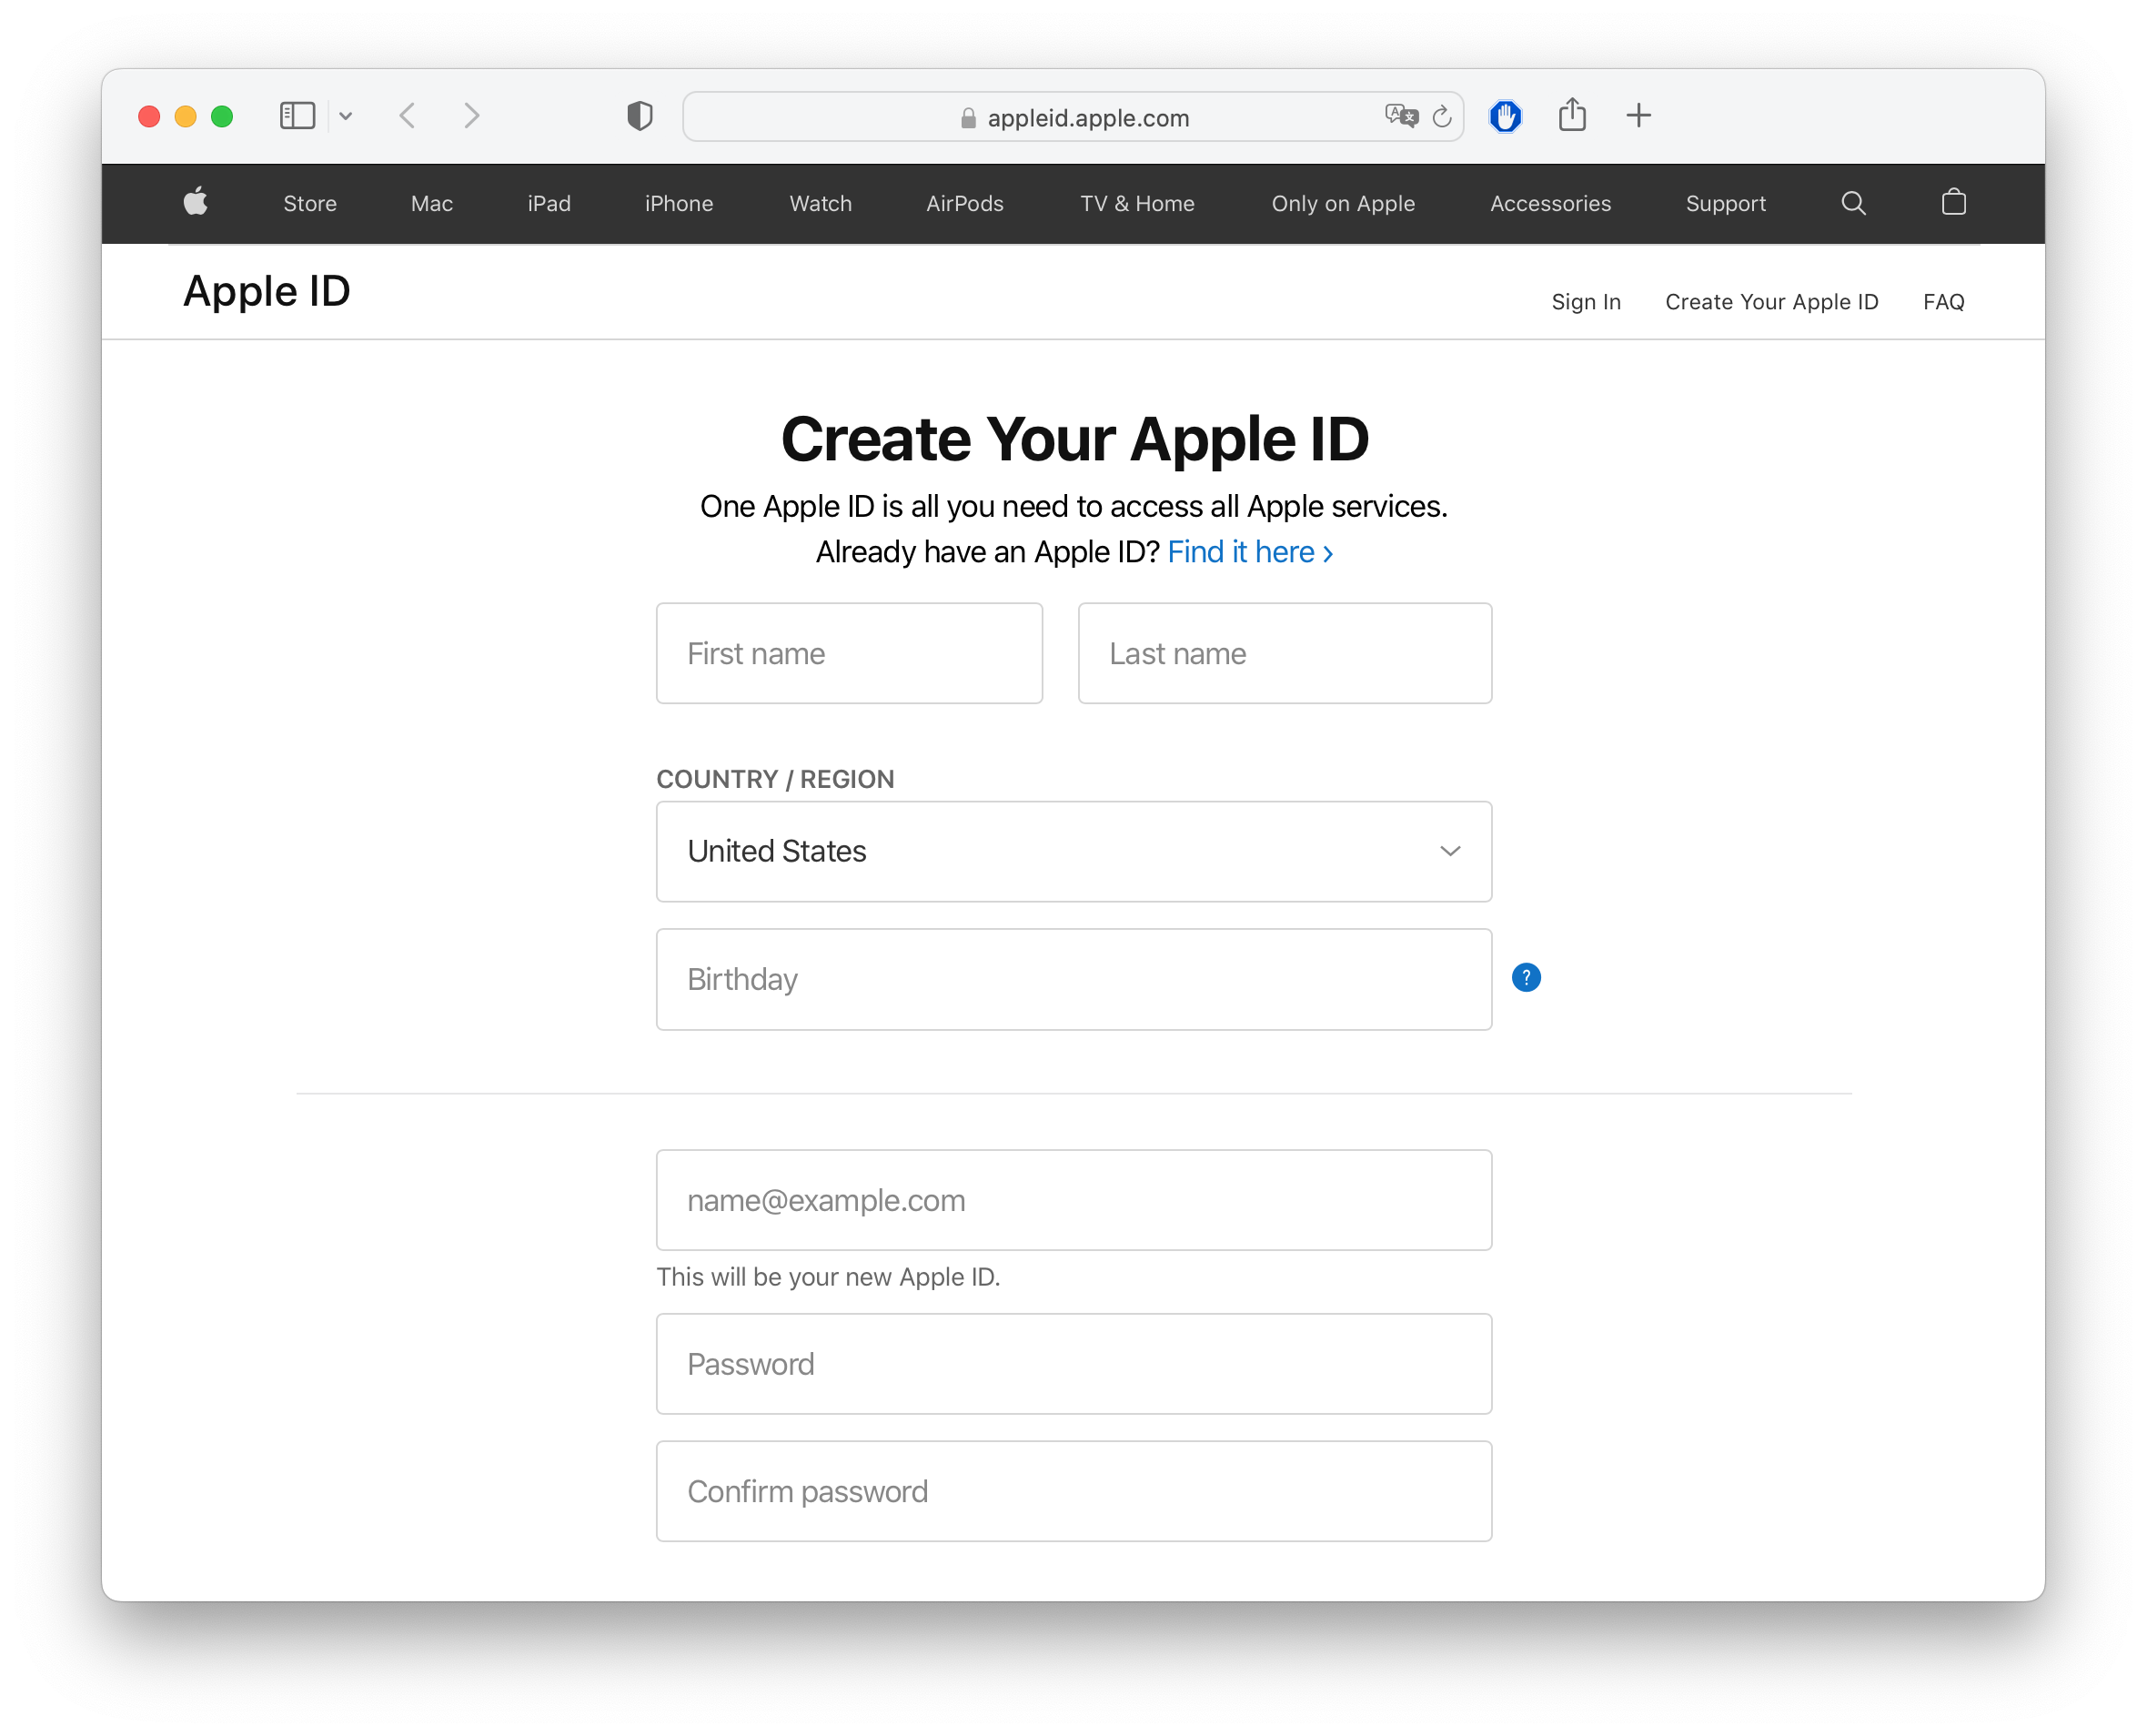 Creating a new Apple ID